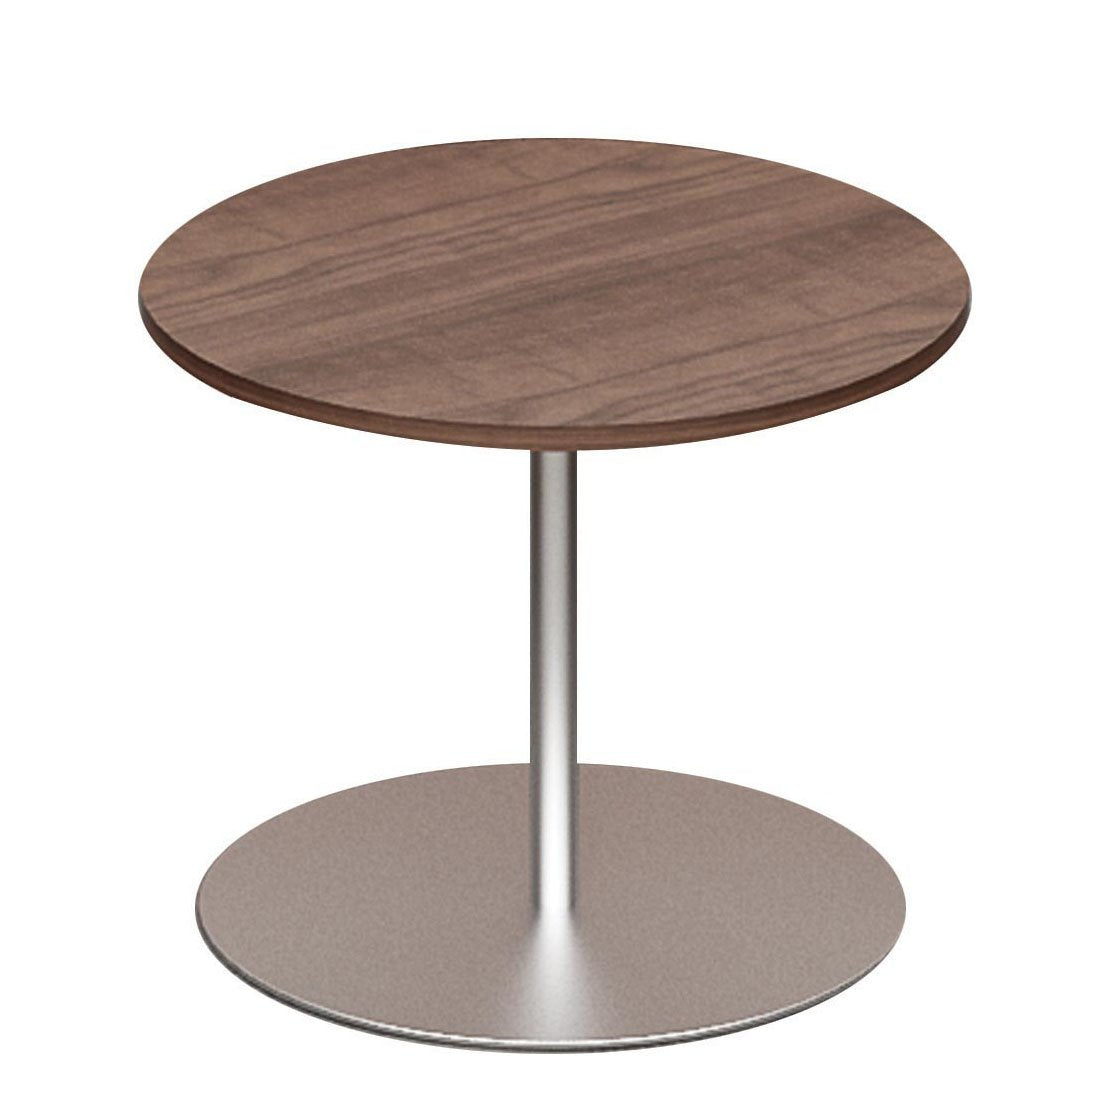 Breakroom Table with Round Base